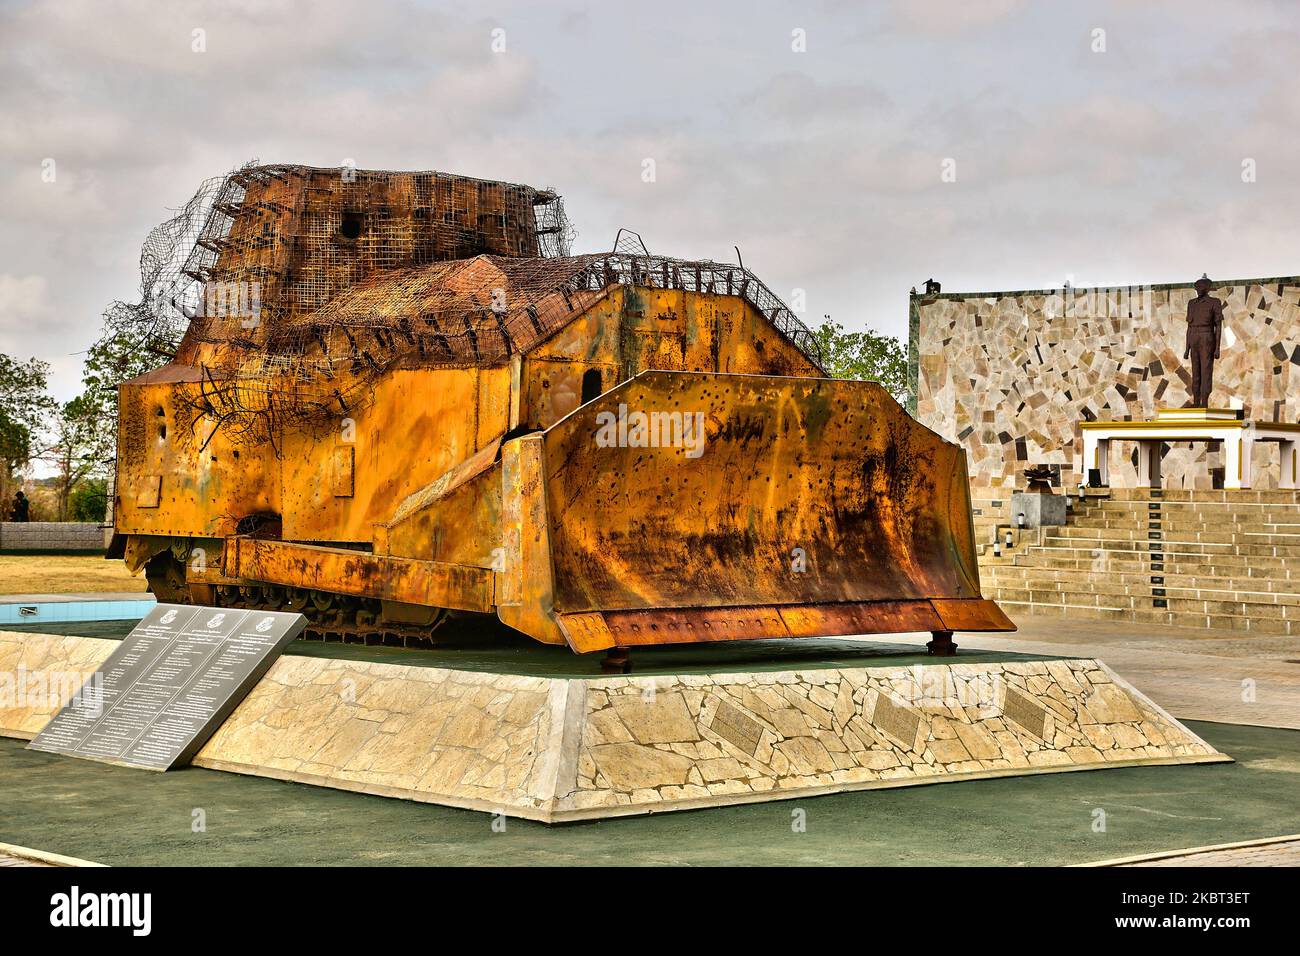 The remains of the improvised armored bulldozer (that was used in place of a battle tank) belonging to the Liberation Tigers of Tamil Eelam (LTTE) during the First Battle of Elephant Pass located at the Elephant Pass, Northern Province, Sri Lanka on August 10, 2017. The bulldozer is part of the Hasalaka War Hero War Memorial (Hasalaka Gamini War Memorial) which honors Corporal Gamini Kularatne of 6 Sri Lanka Sinha Regiment (SLSR) who was killed on 14 July 1991 while preventing the bulldozer from ramming into the Elephant Pass Army garrison. Corporal Kularatne used two hand grenades to kill the Stock Photo